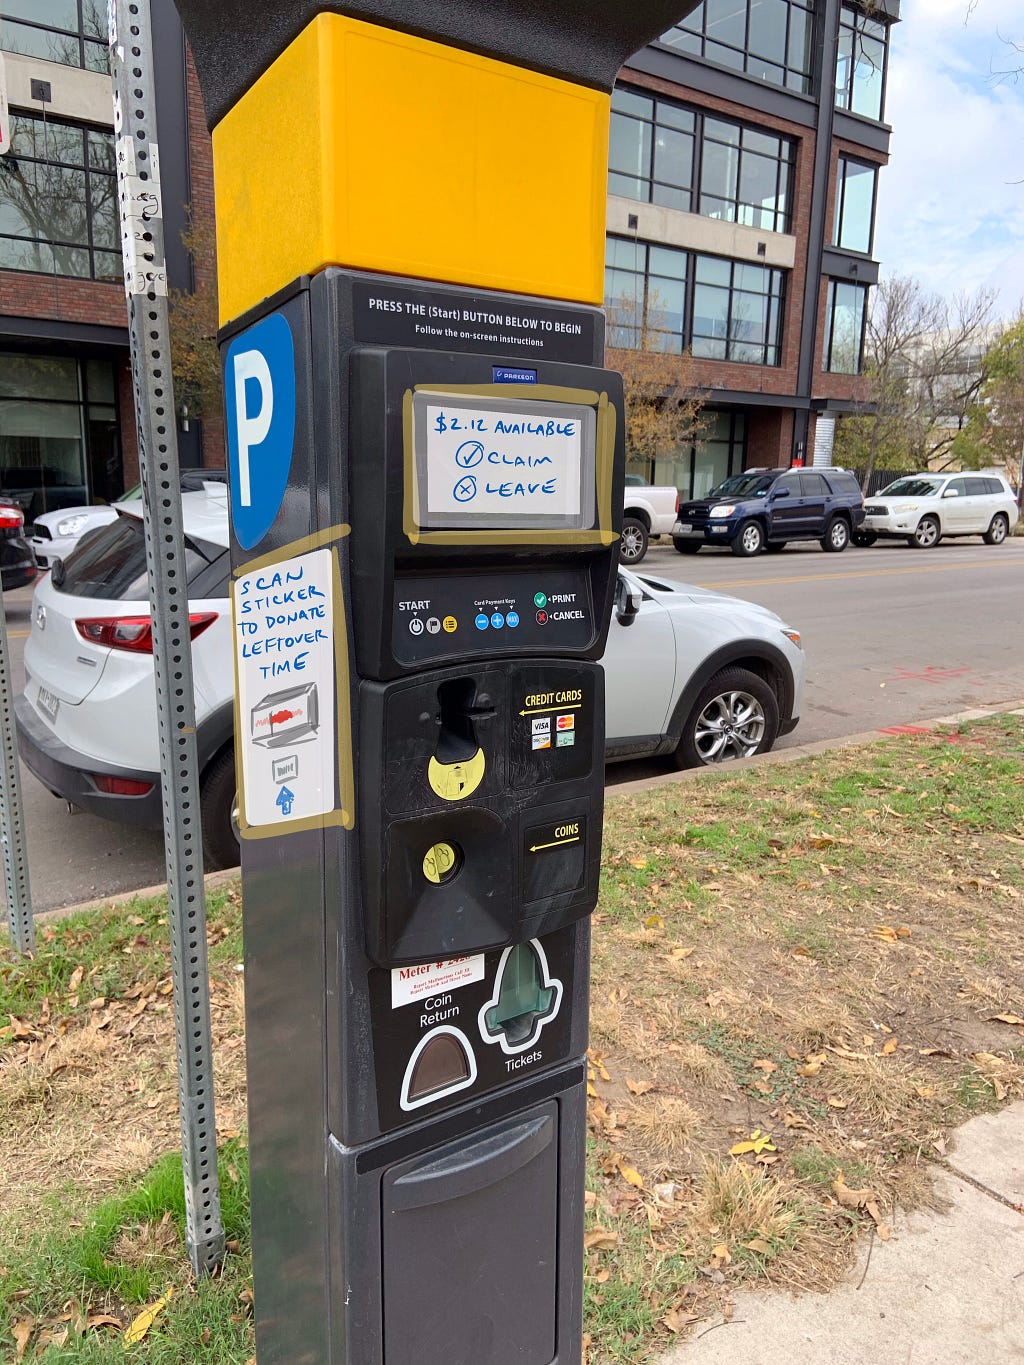 A concept allowing people to digitally pay forward their leftover time from a parking meter.